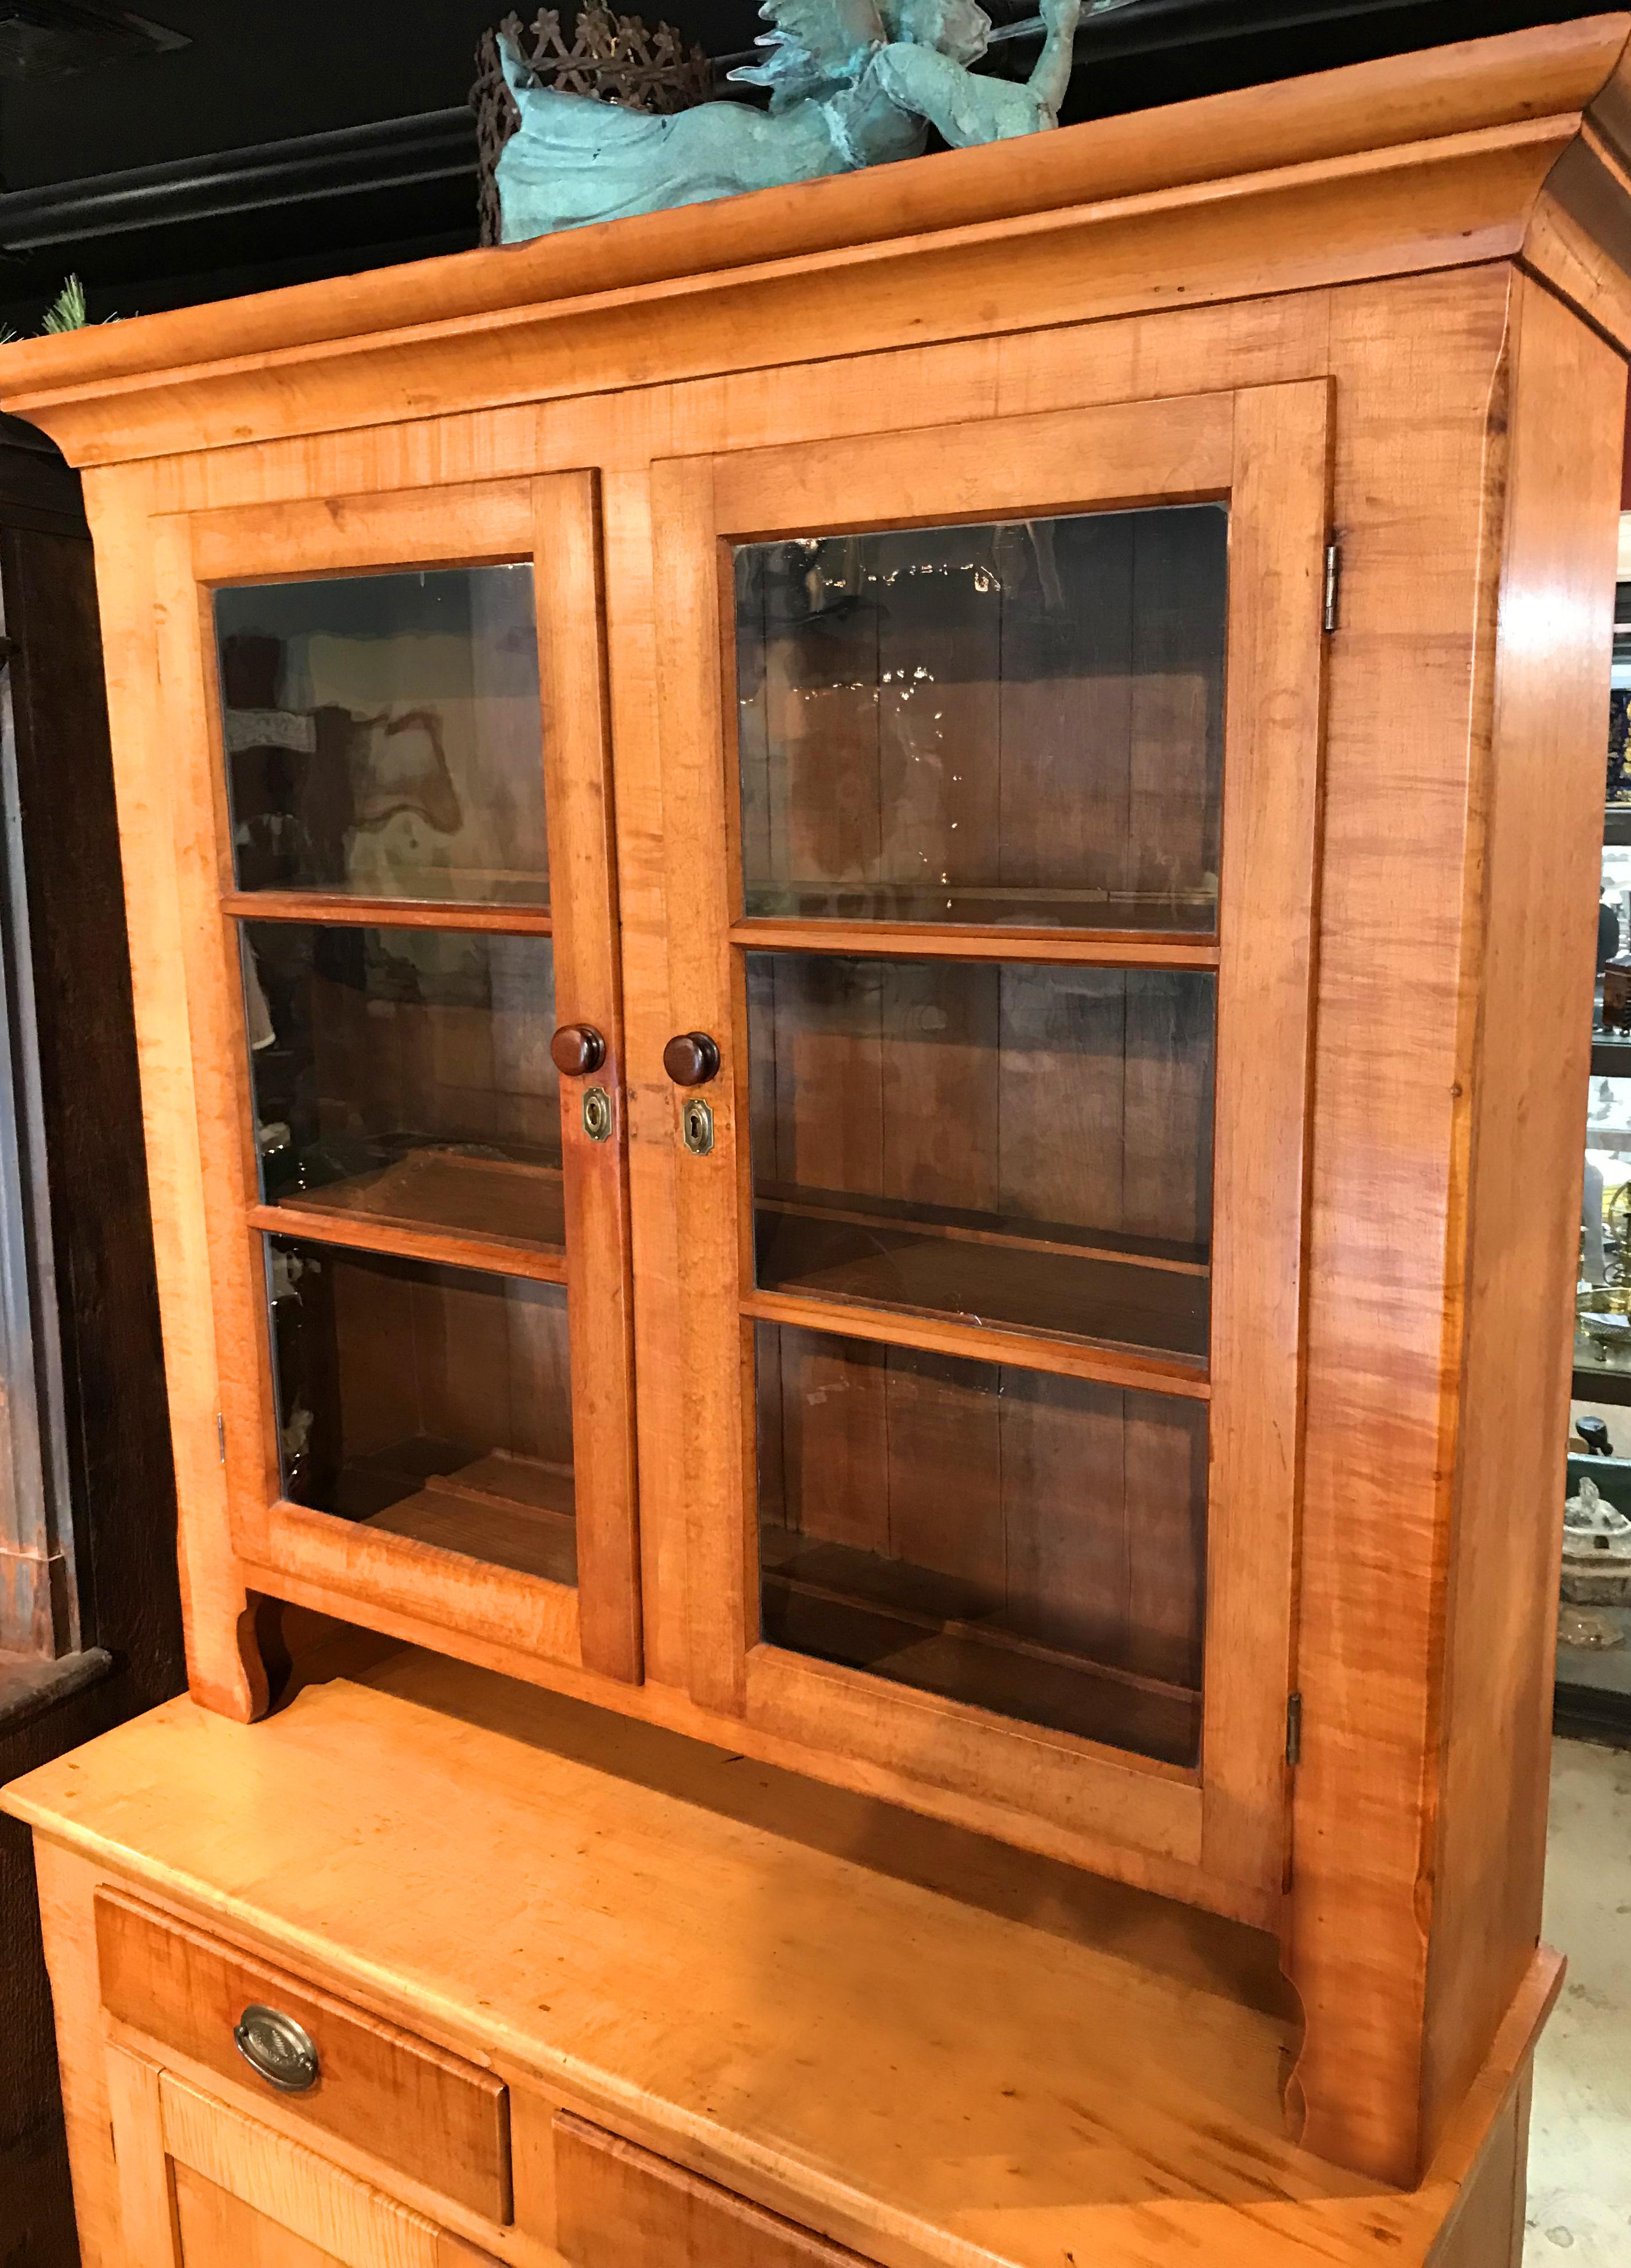 A fine two-part tiger maple cupboard or hutch with molded cornice surmounting an upper case with two three-pane doors, which open to a three shelf interior with plate rails, over a lower case with two fitted drawers with decorative beehive brass